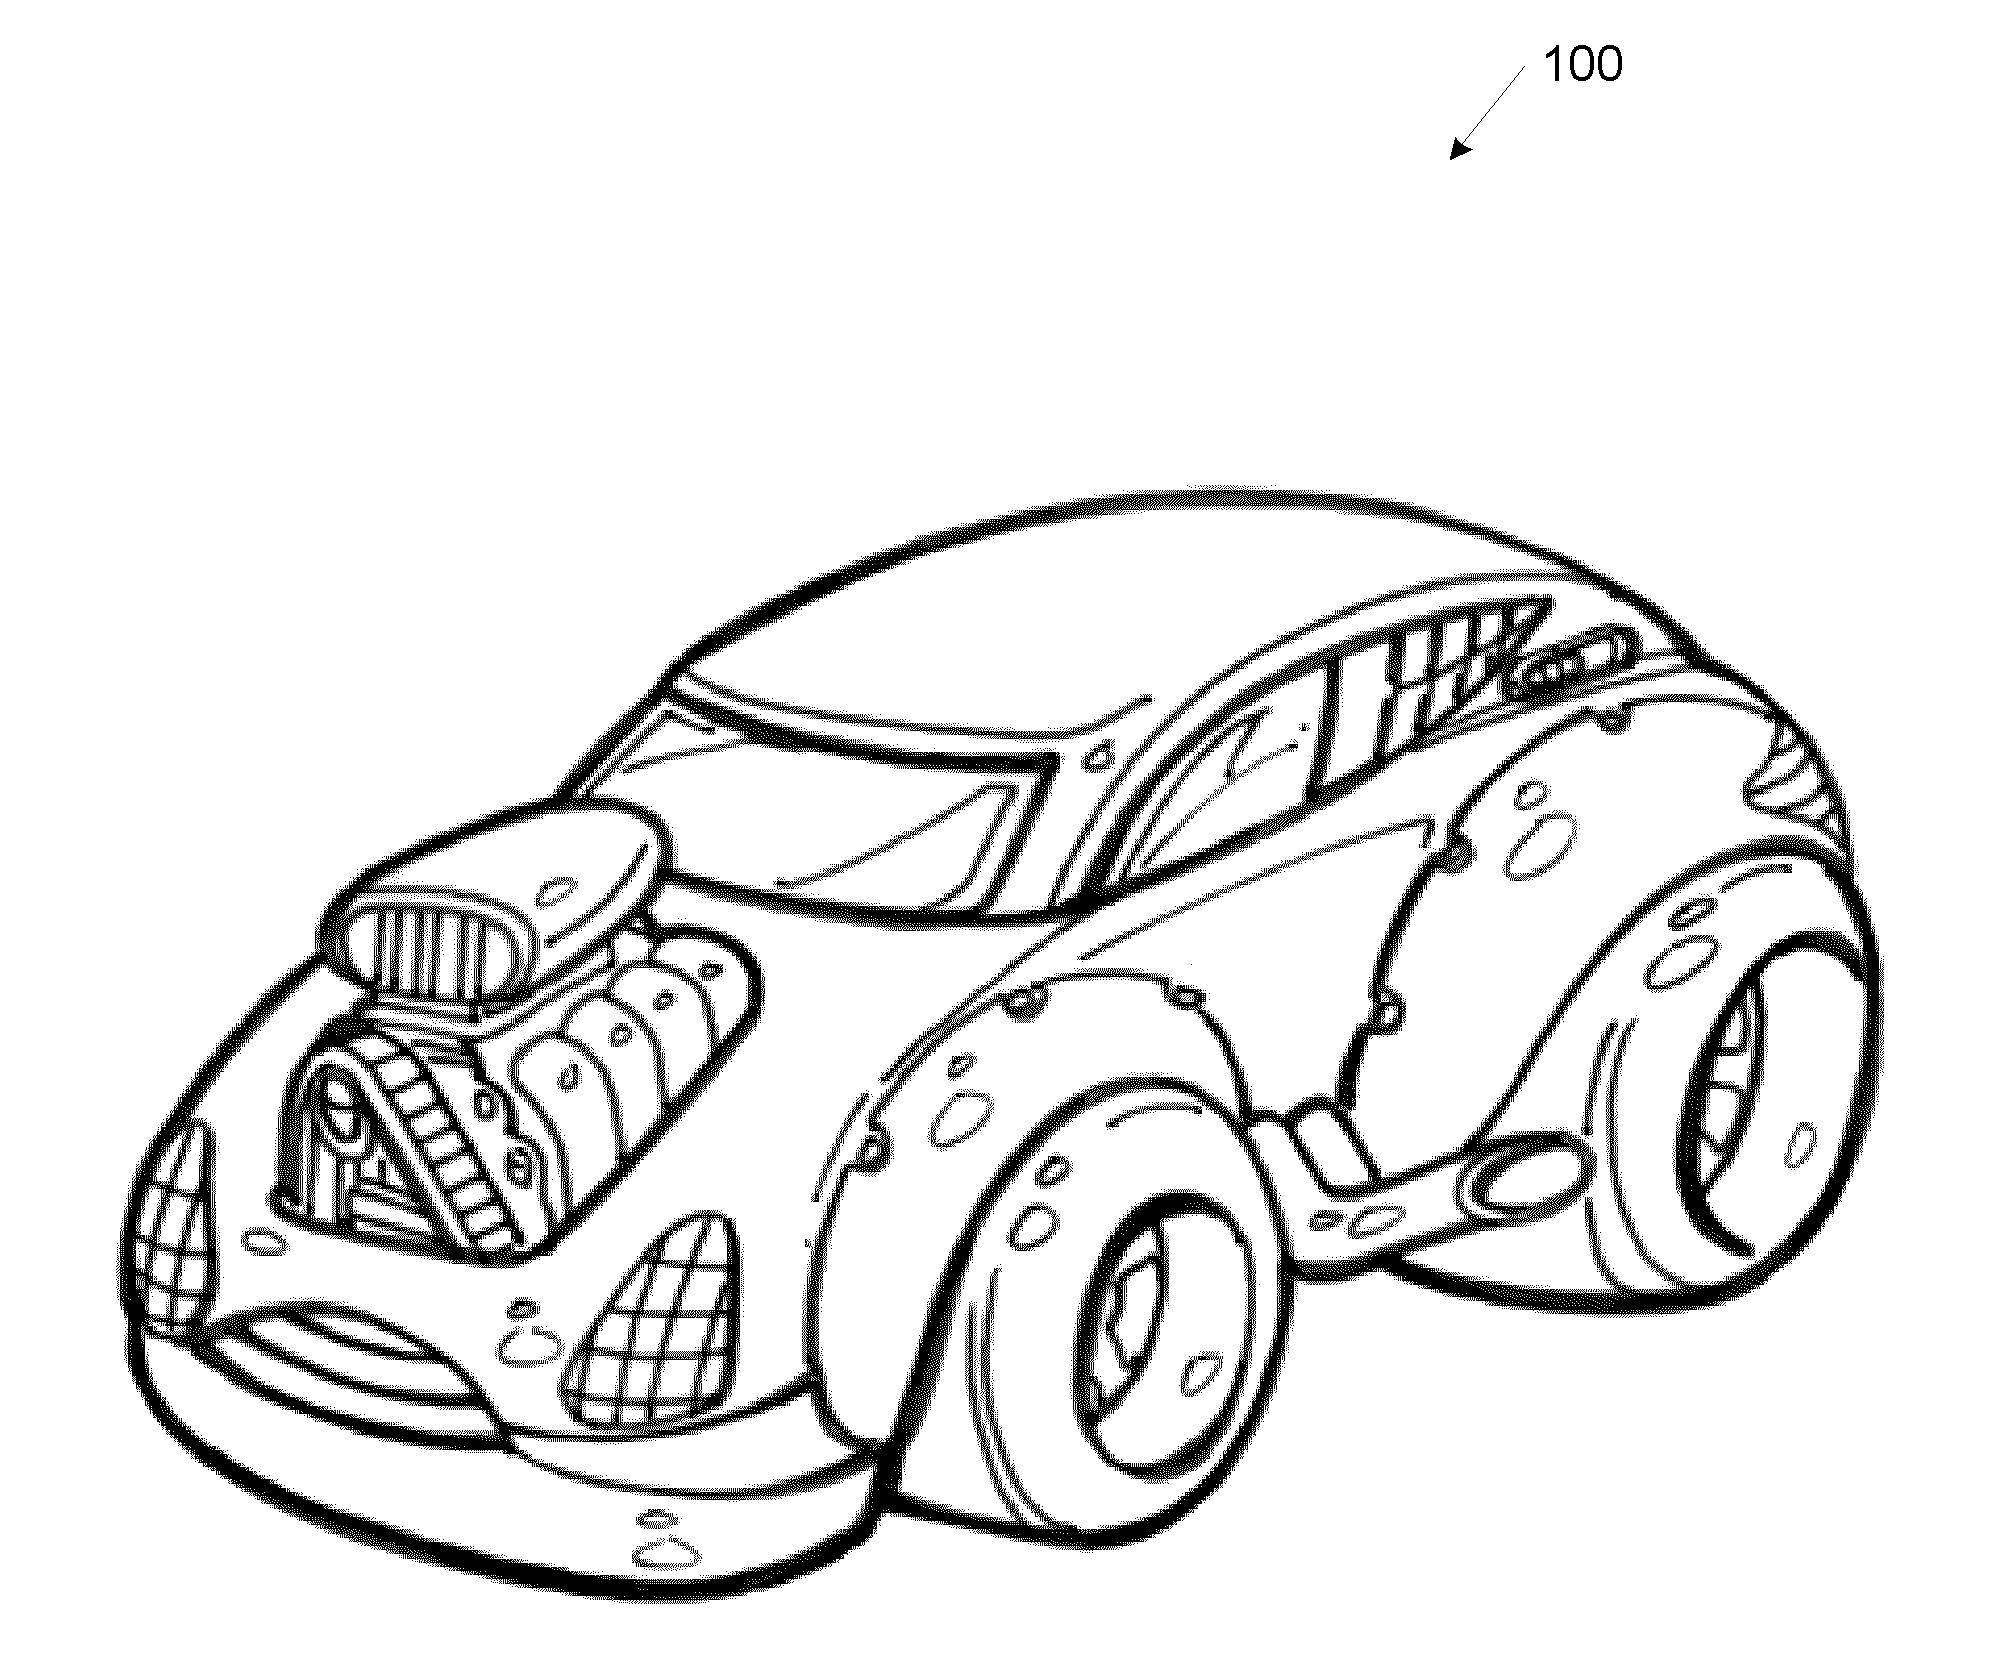 Apparatus, method, and computer program product for toy vehicle